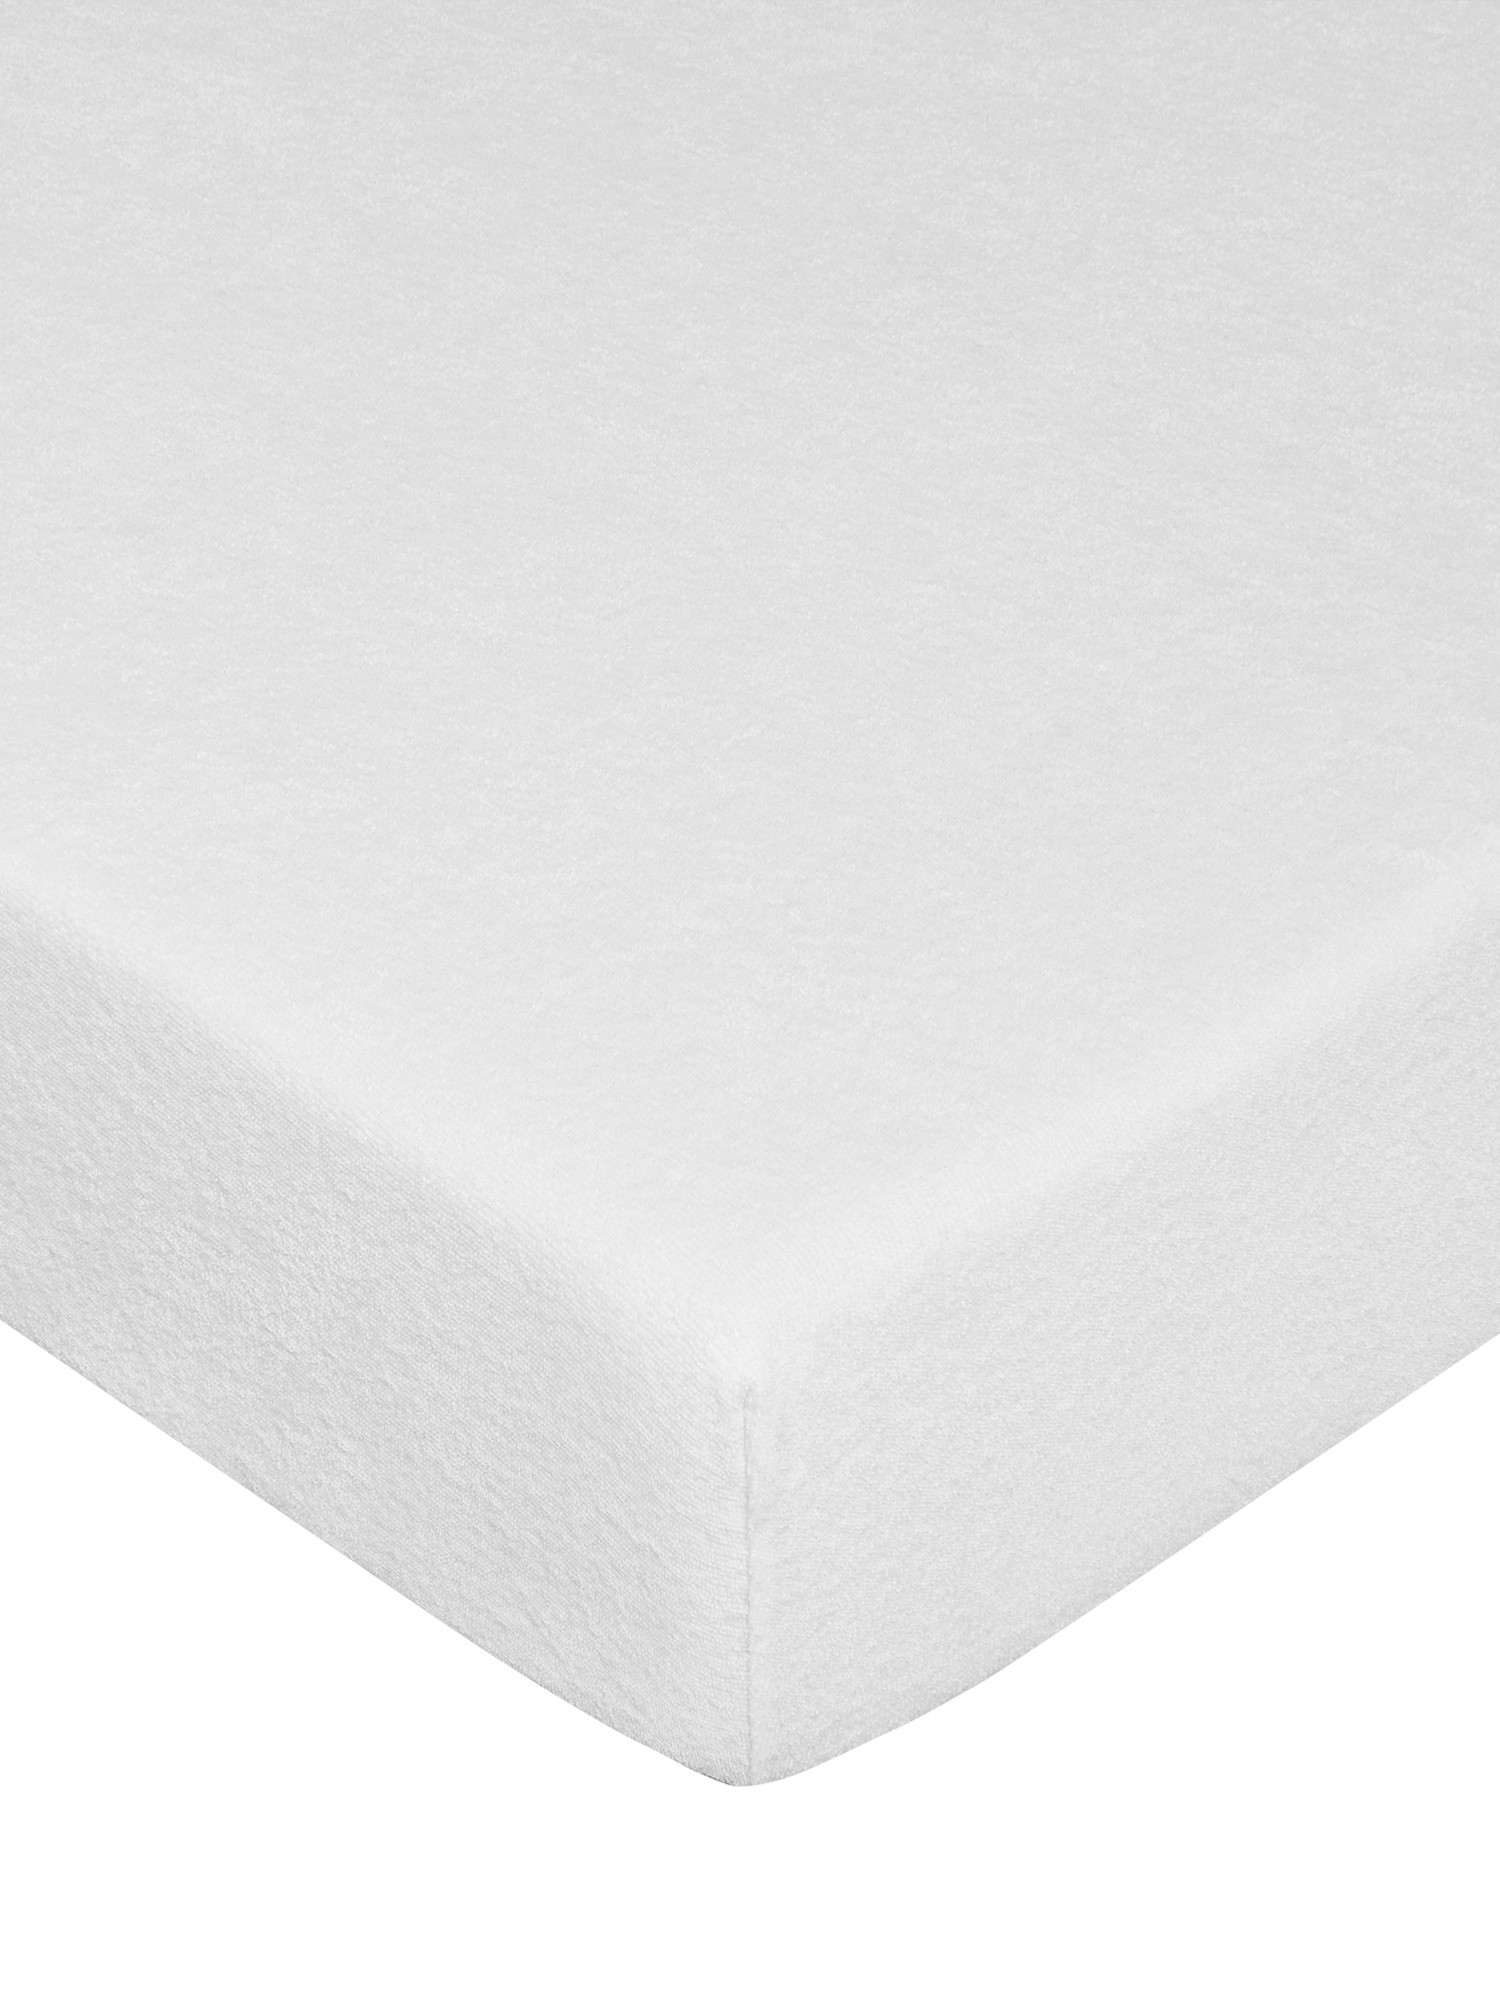 Jersey cotton mattress cover, White, large image number 0